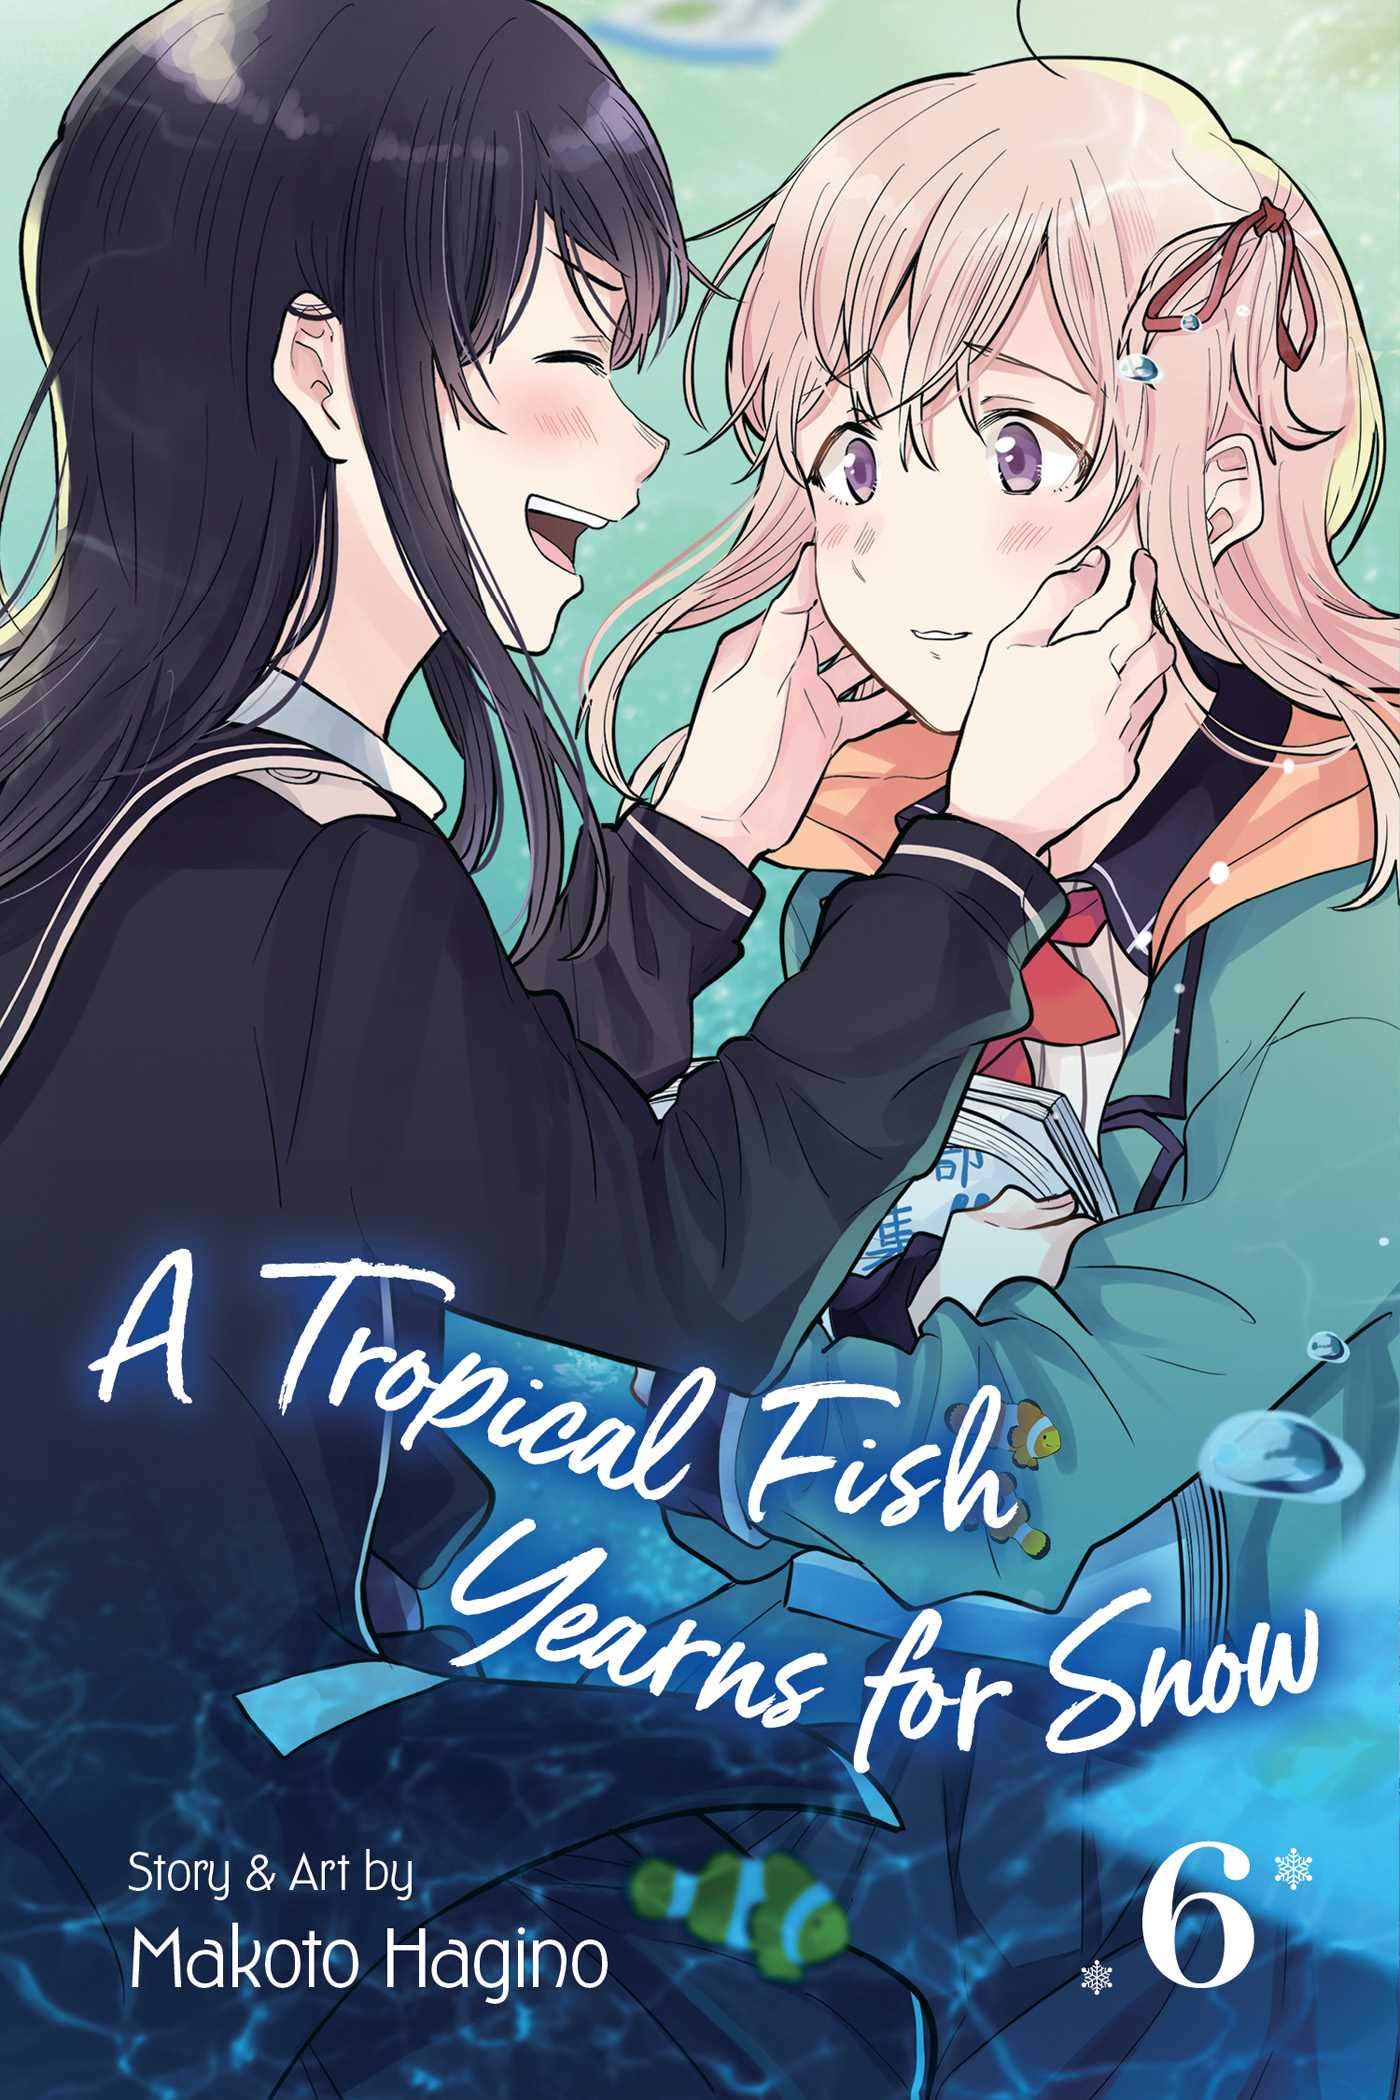 Tropical Fish Yearns for Snow - Volume 6